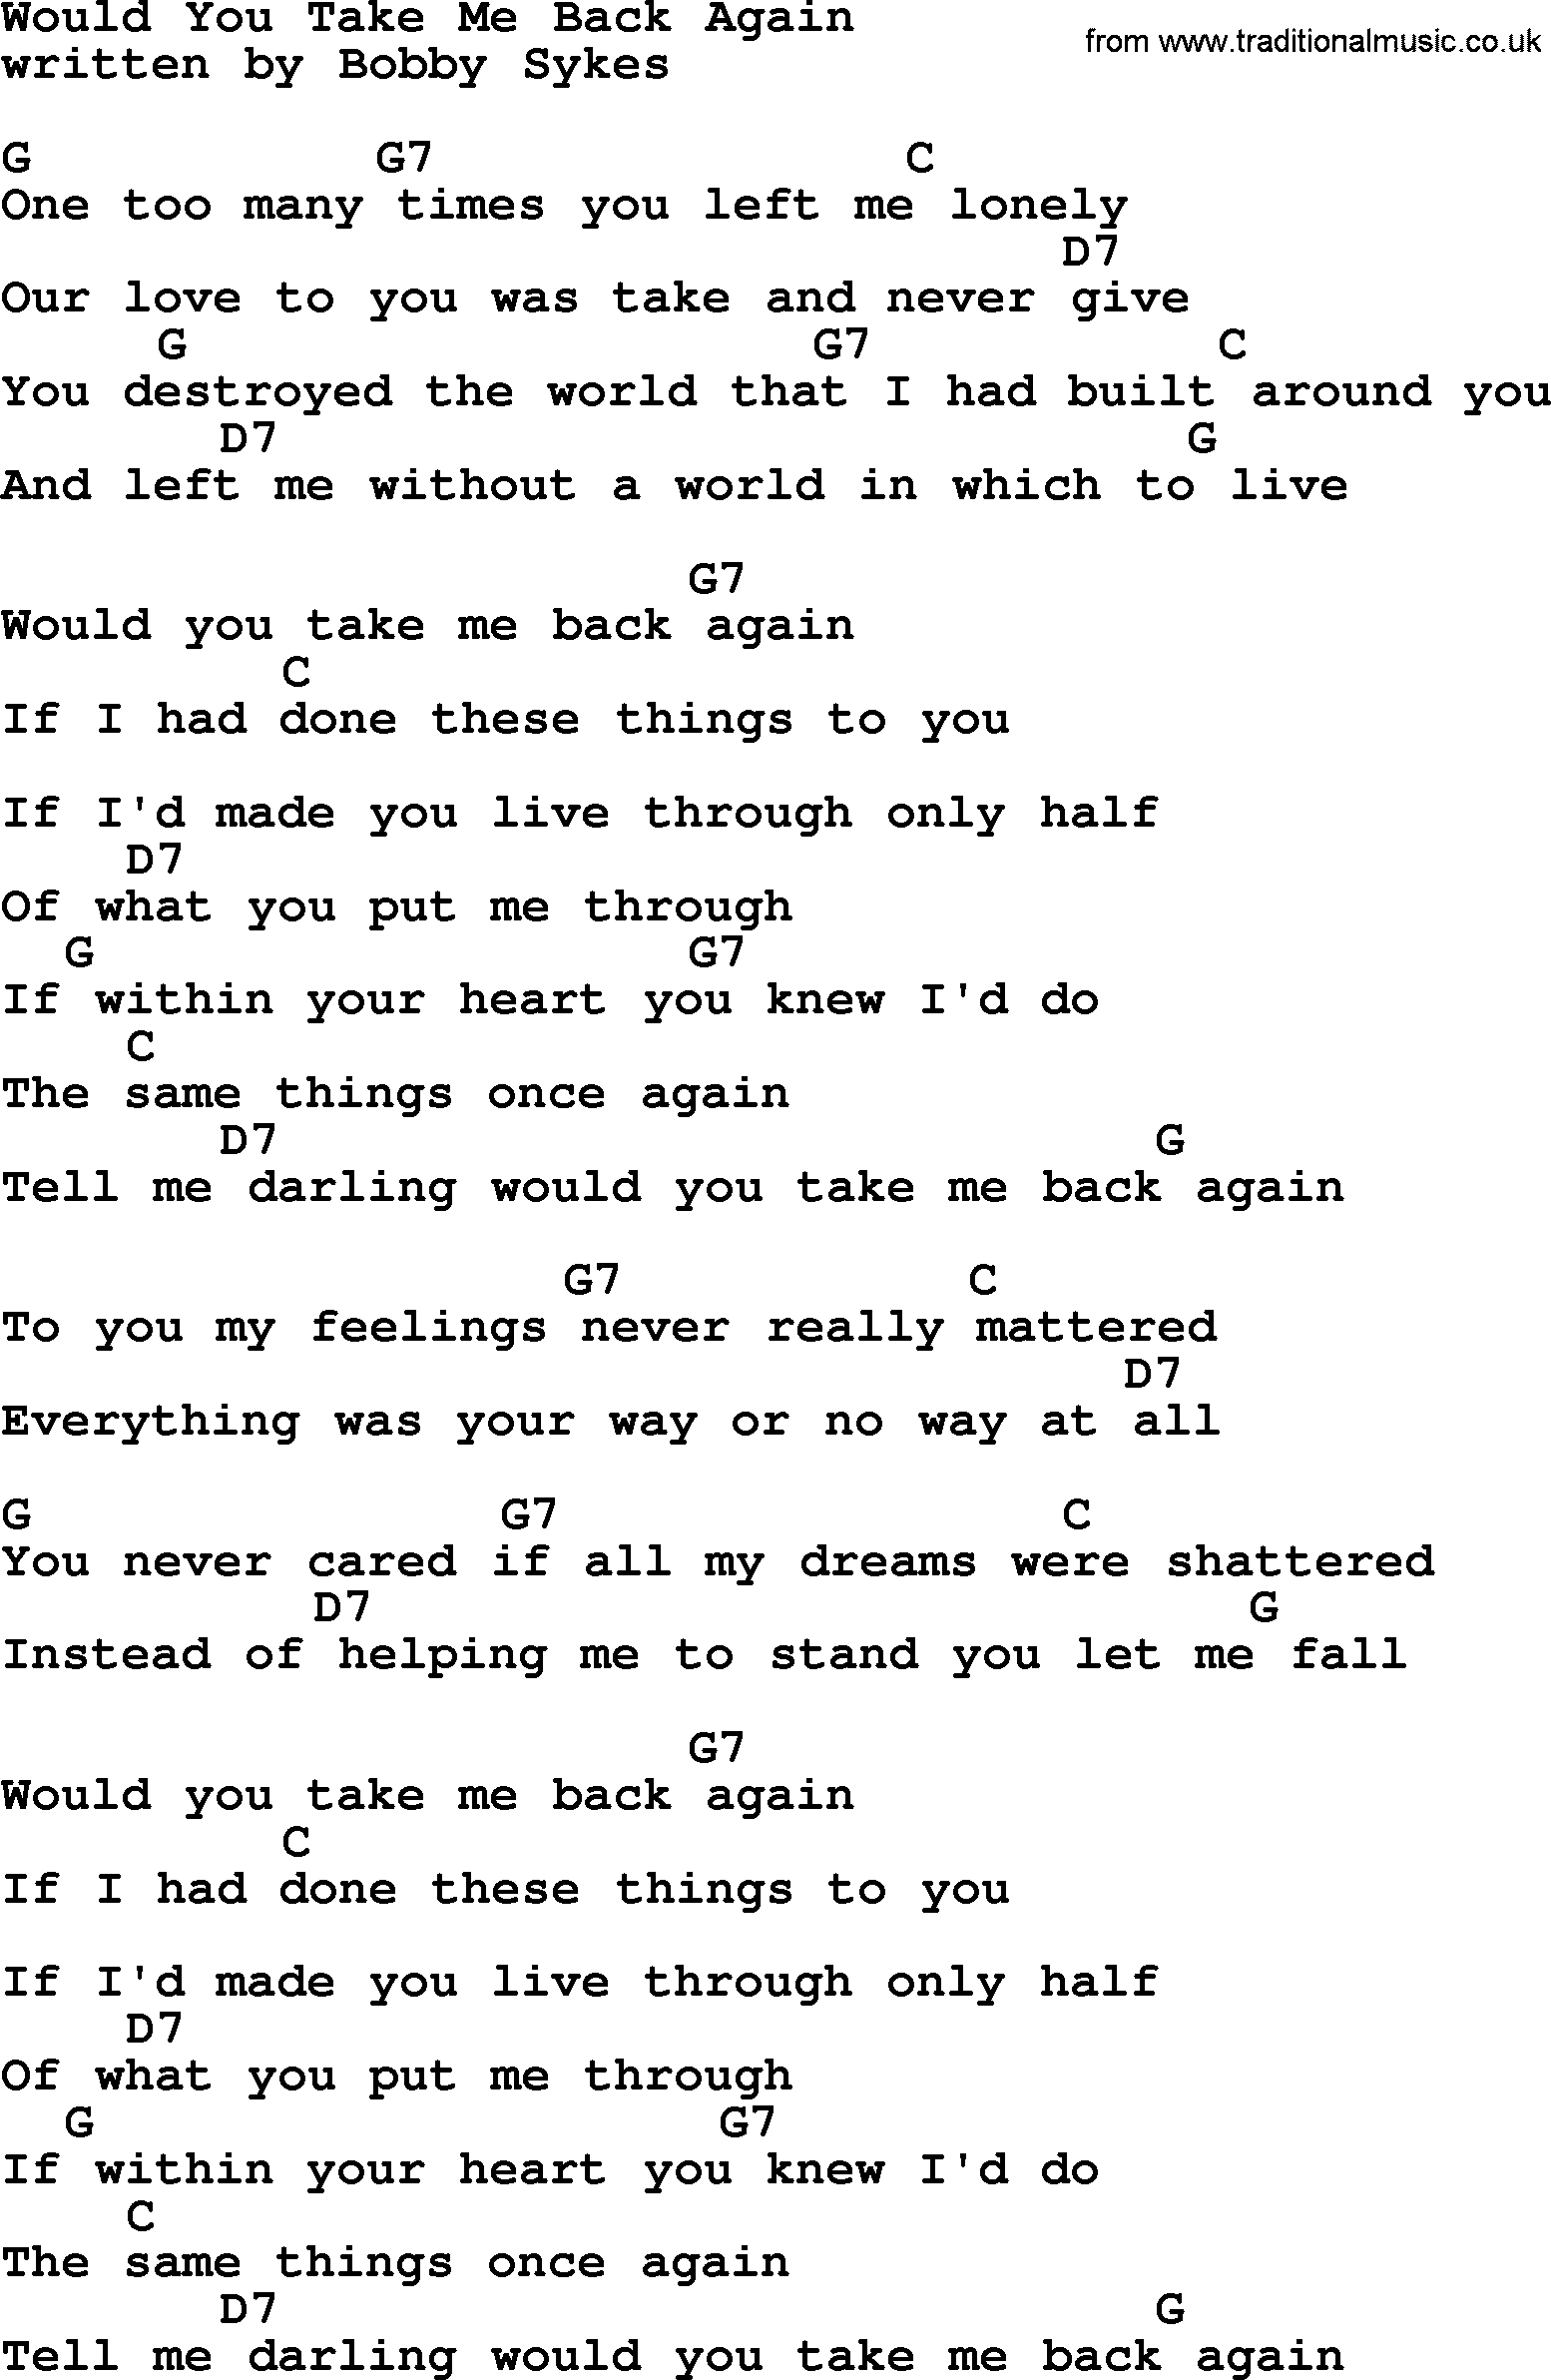 Marty Robbins song: Would You Take Me Back Again, lyrics and chords